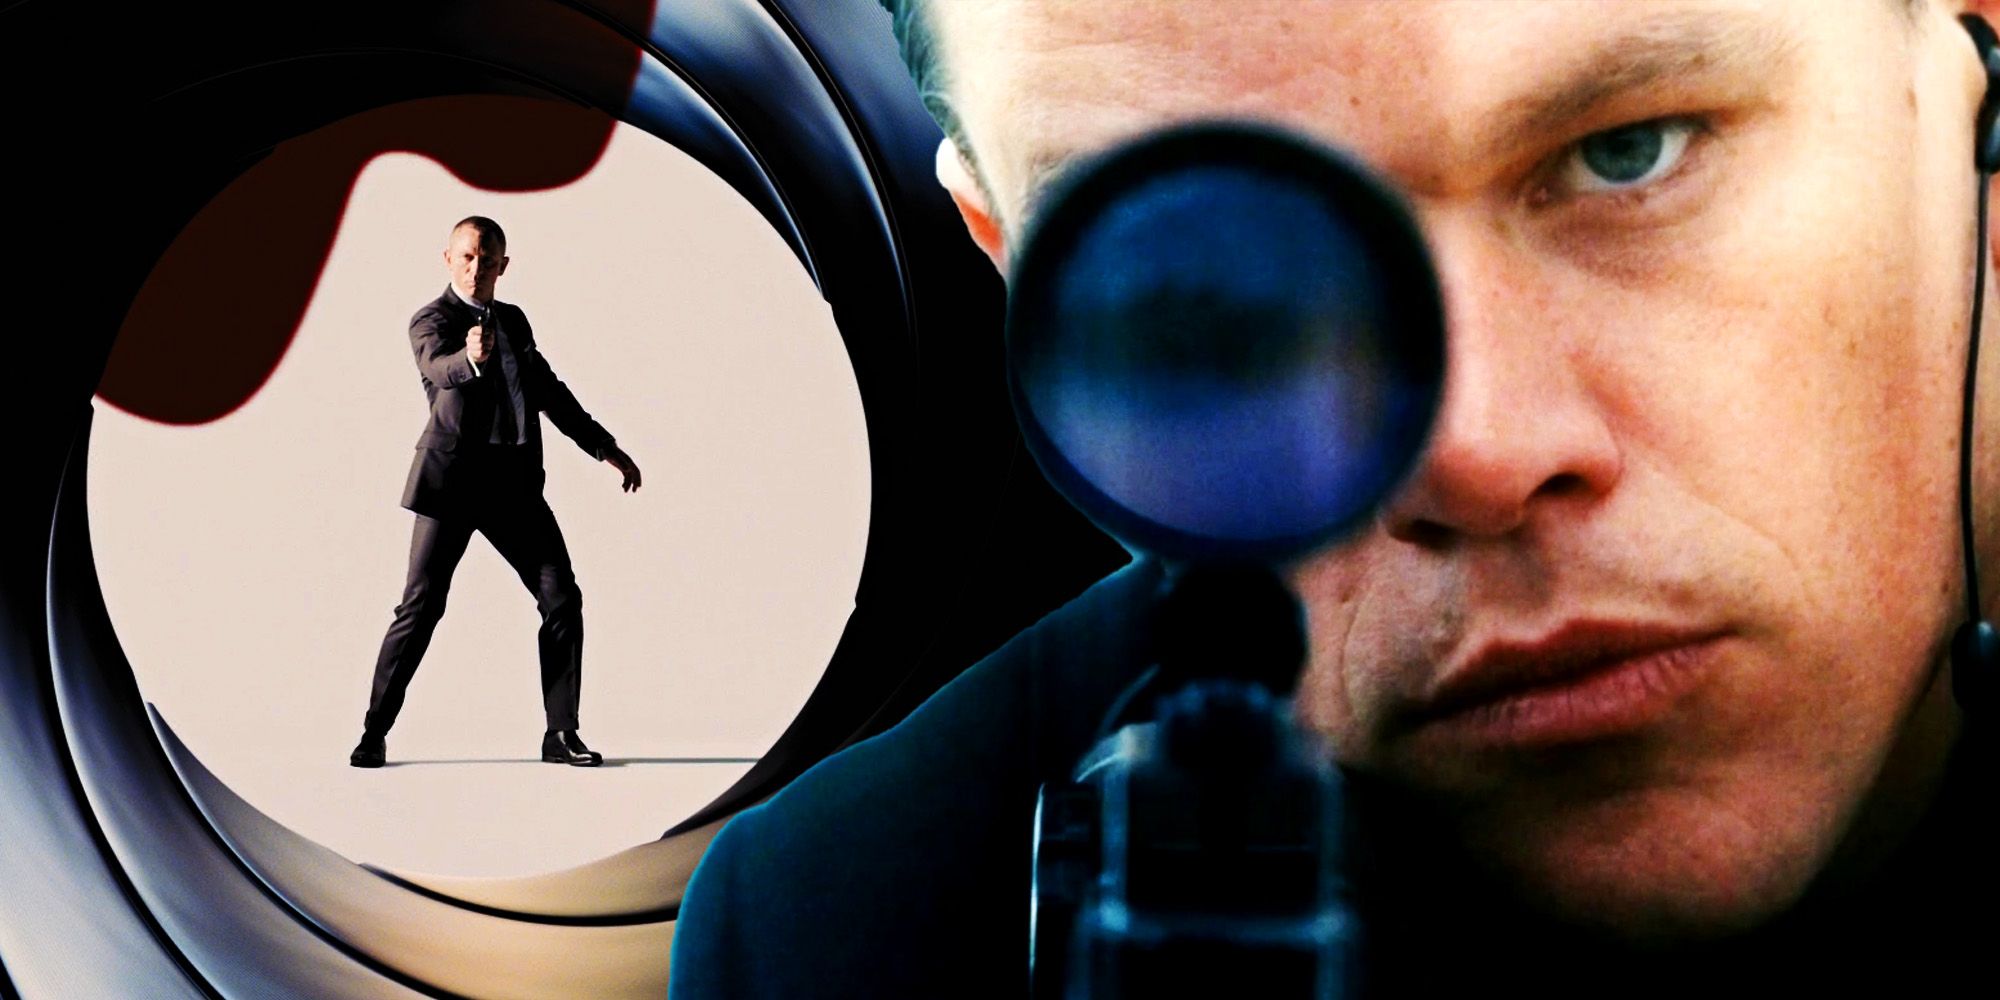 5 Things The Bourne Franchise Has That James Bond Doesn't